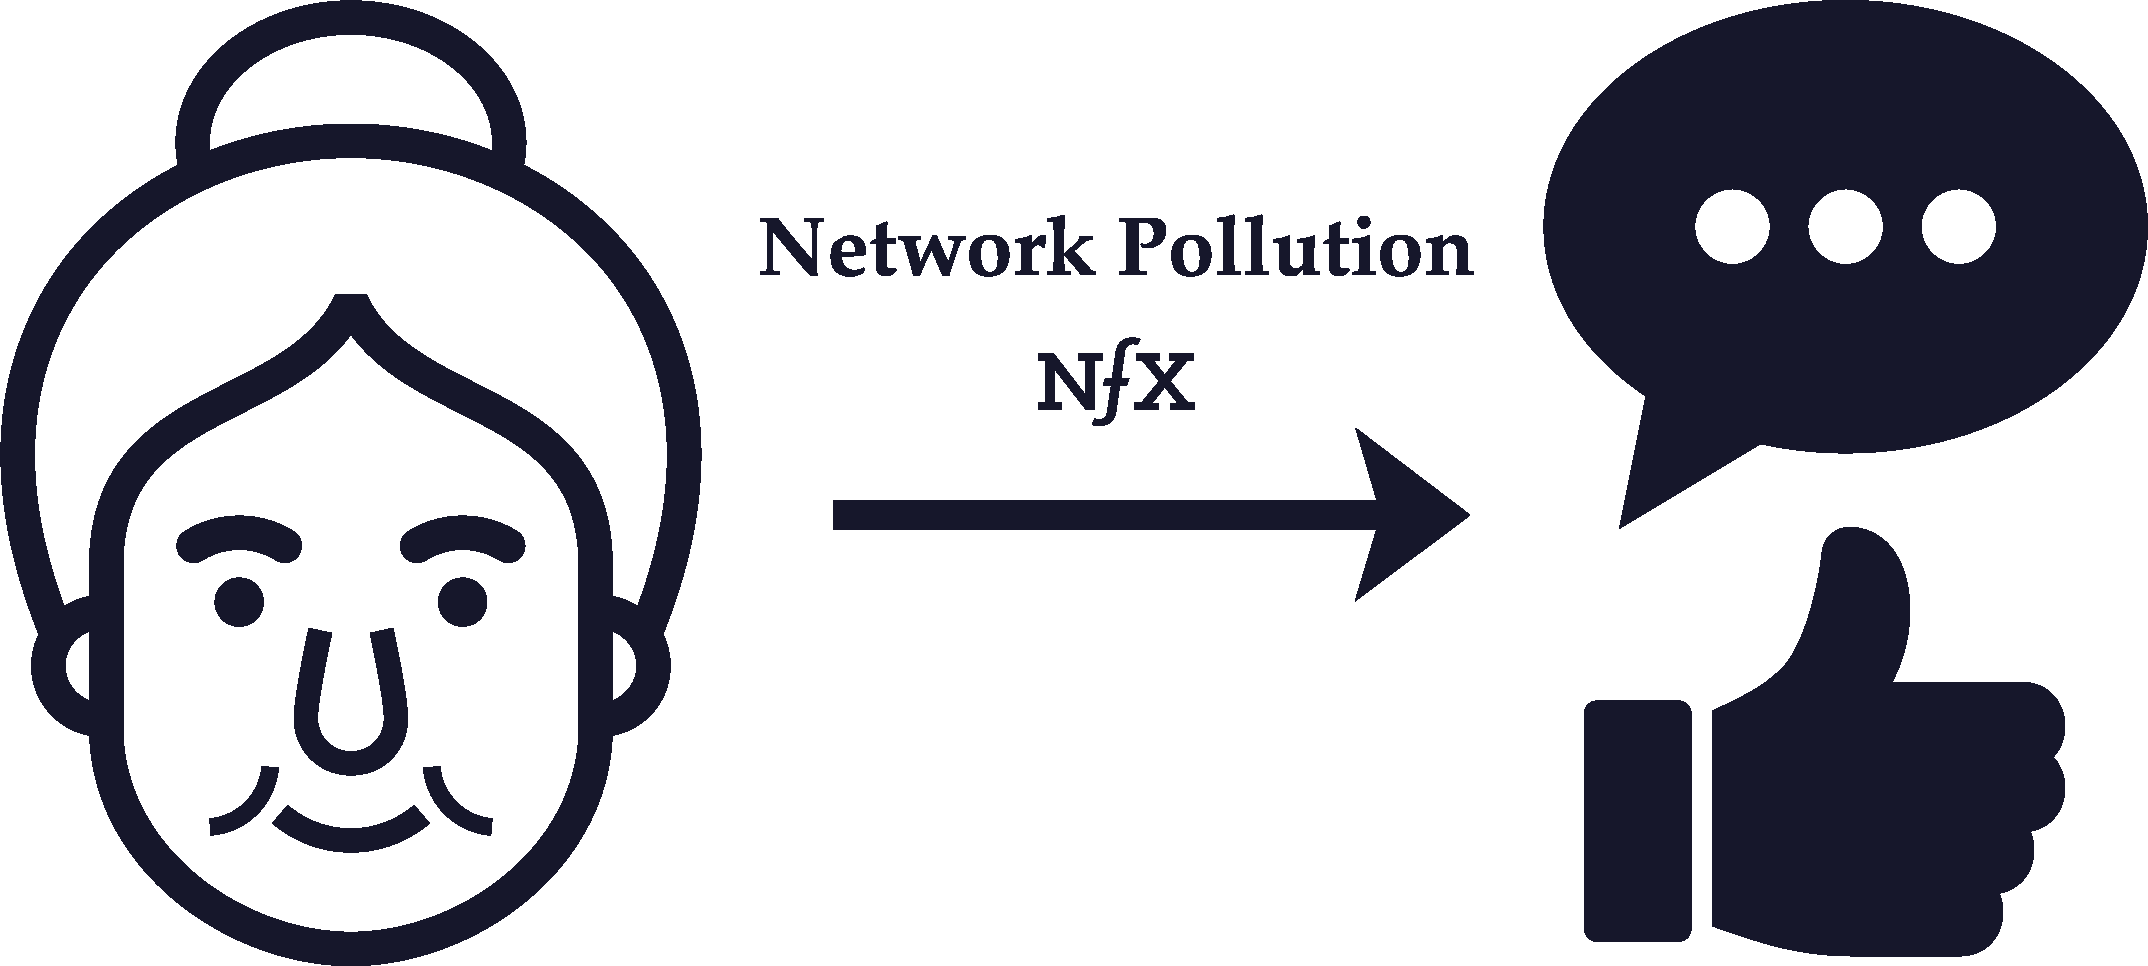 Network pollution